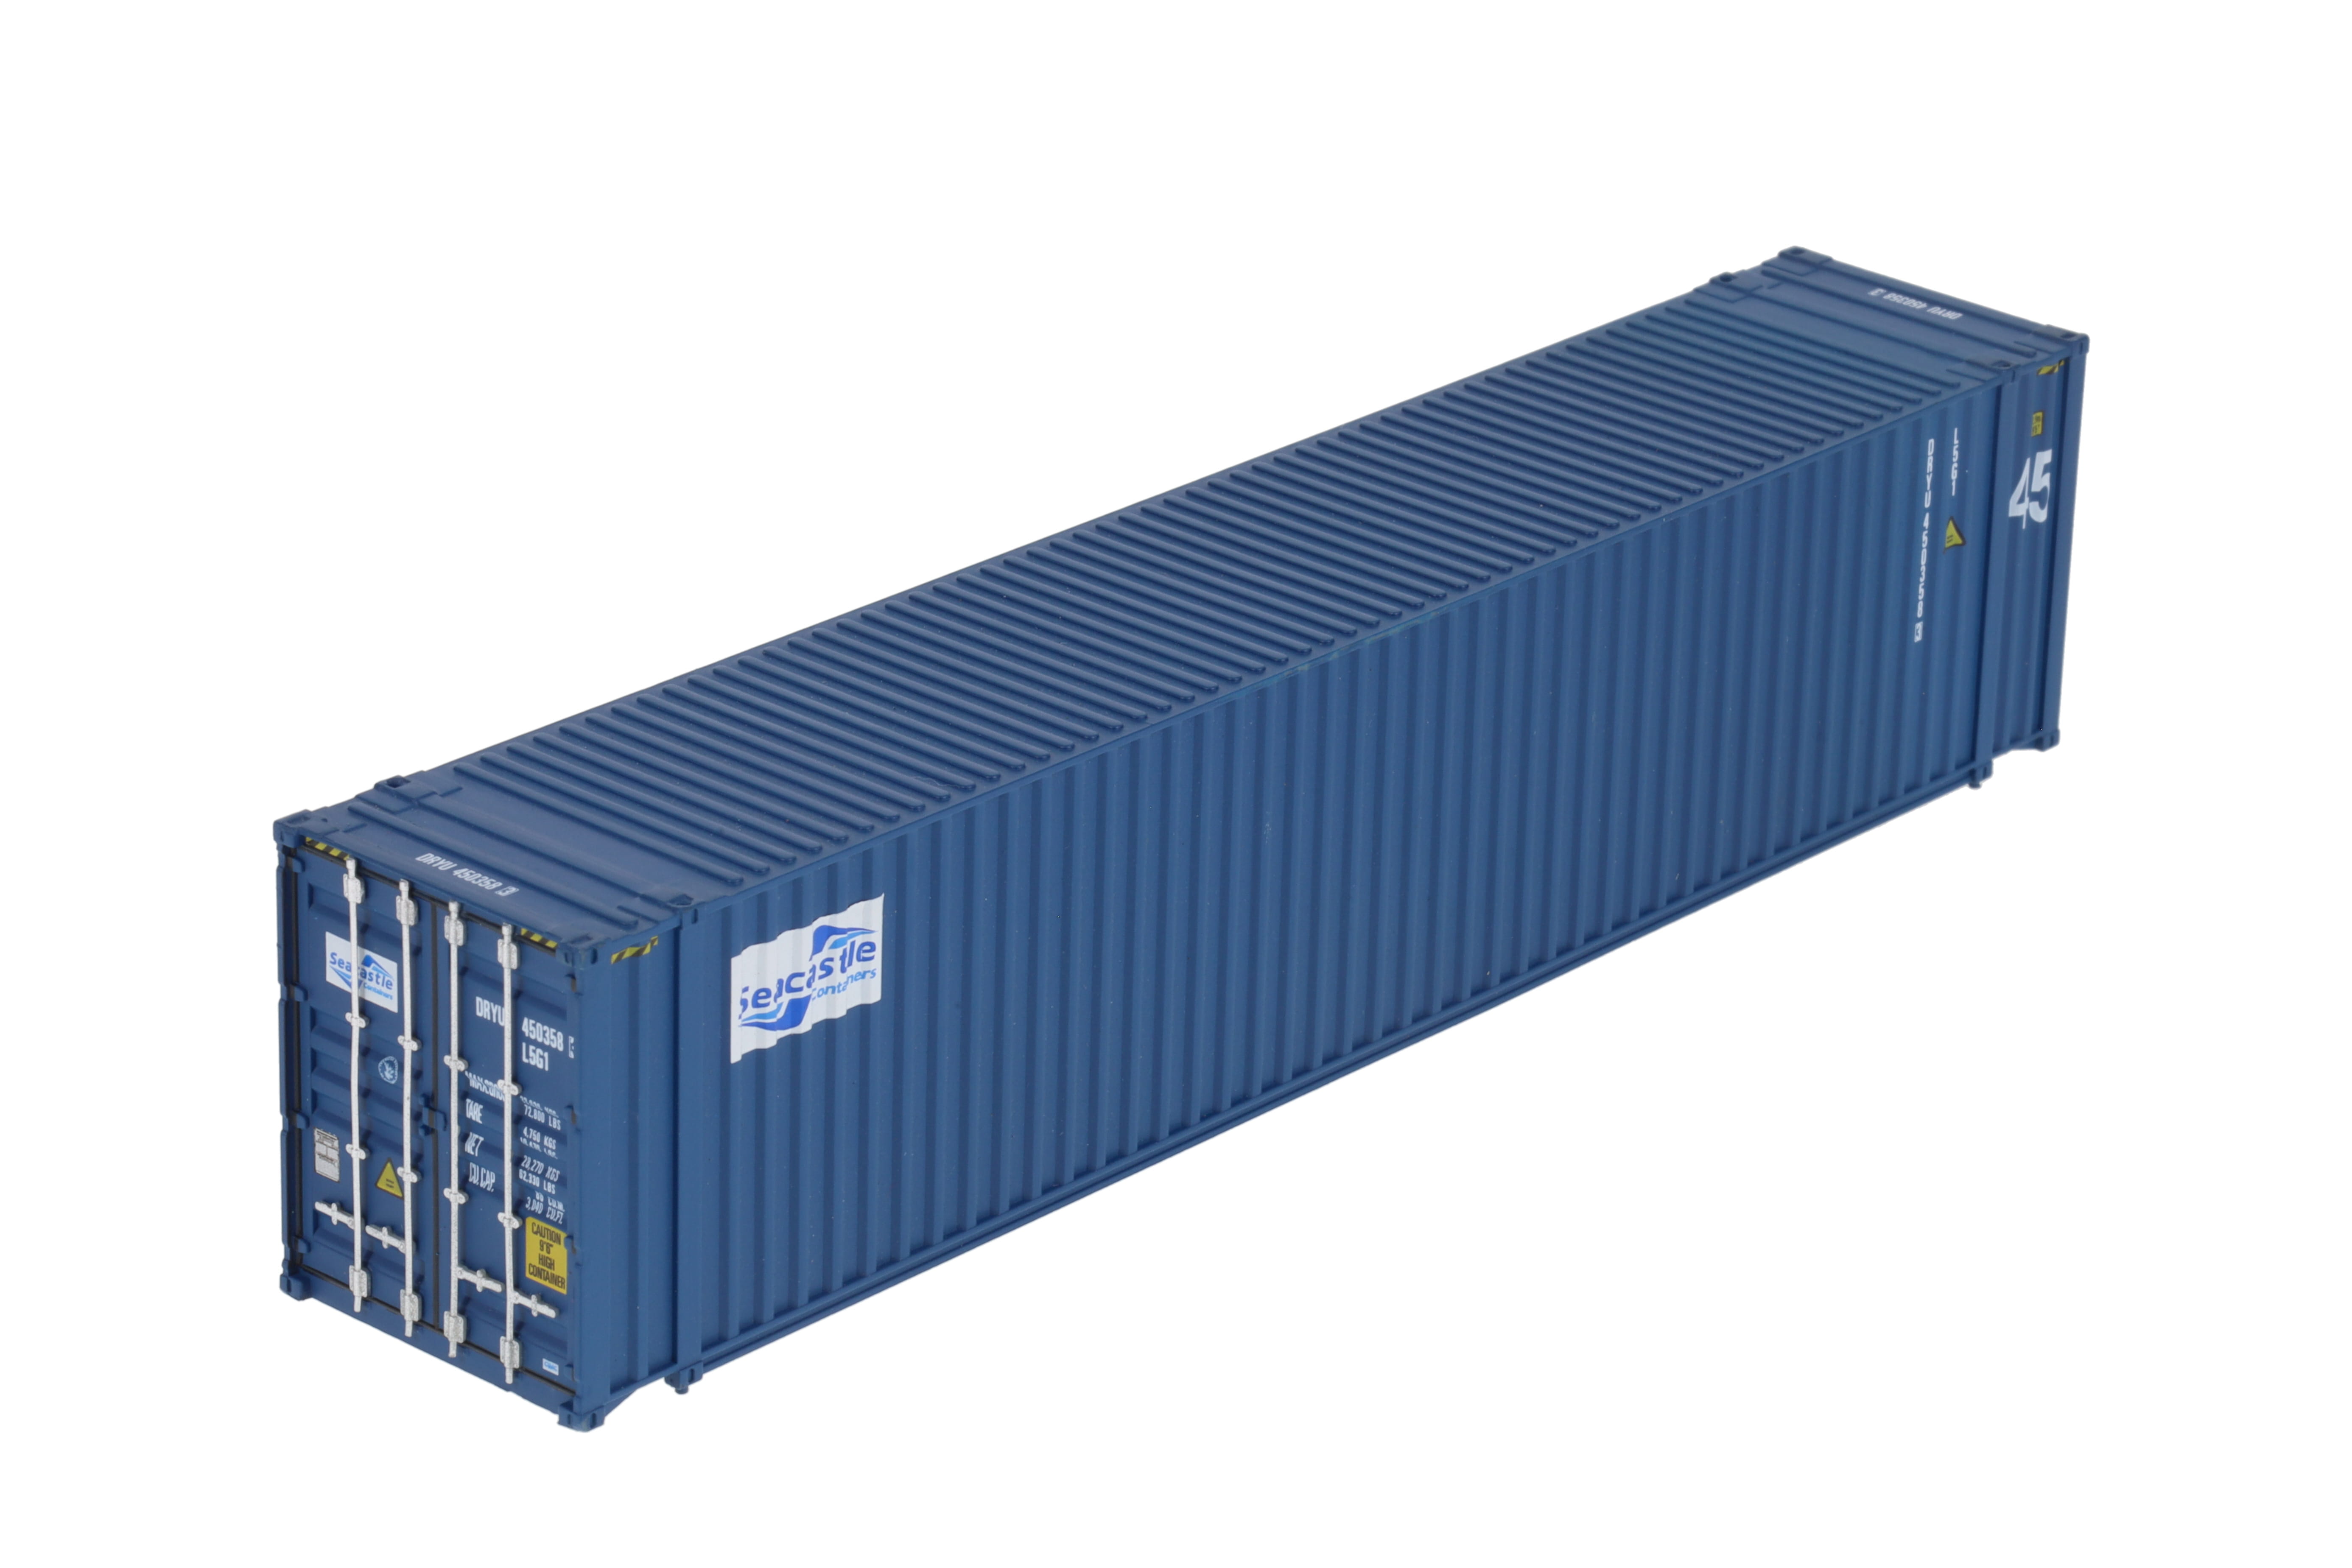 45" Container "Seacastle" 